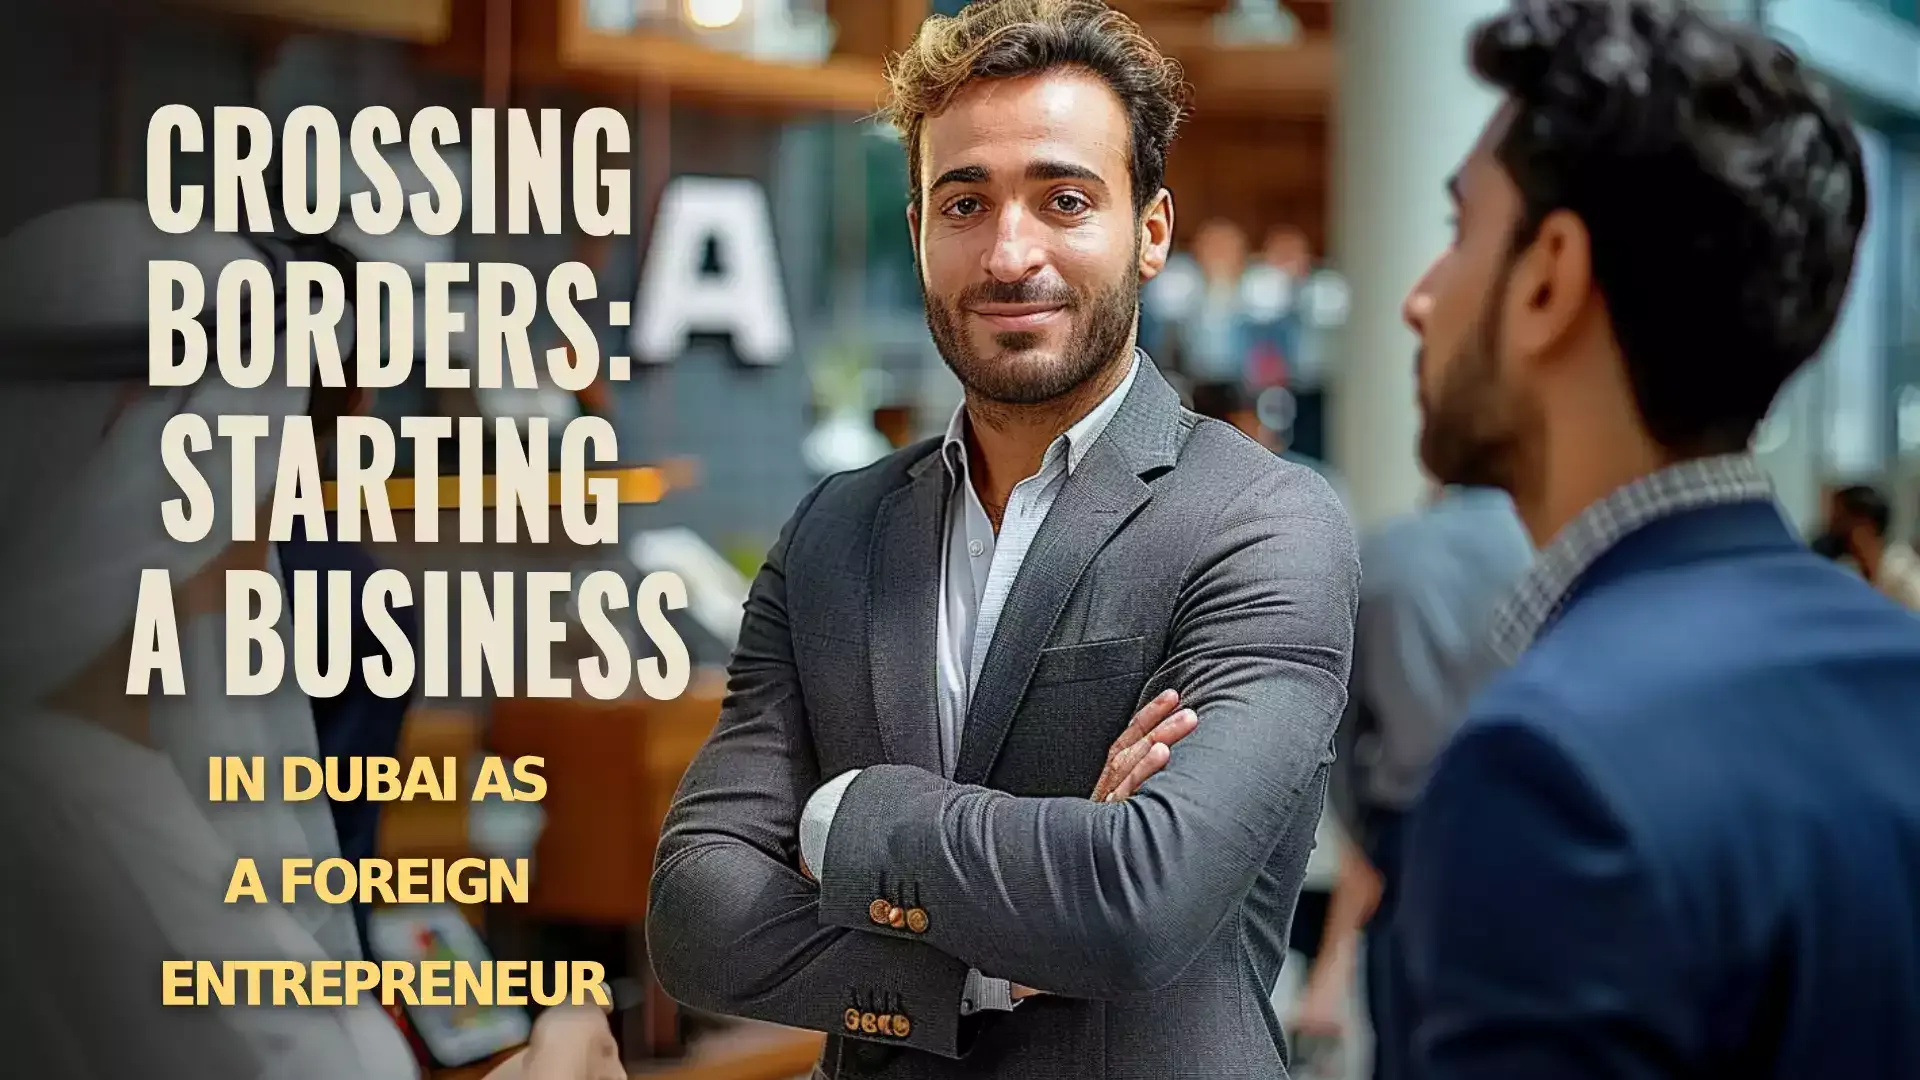 Image showing the process of starting a business in Dubai as a foreigner